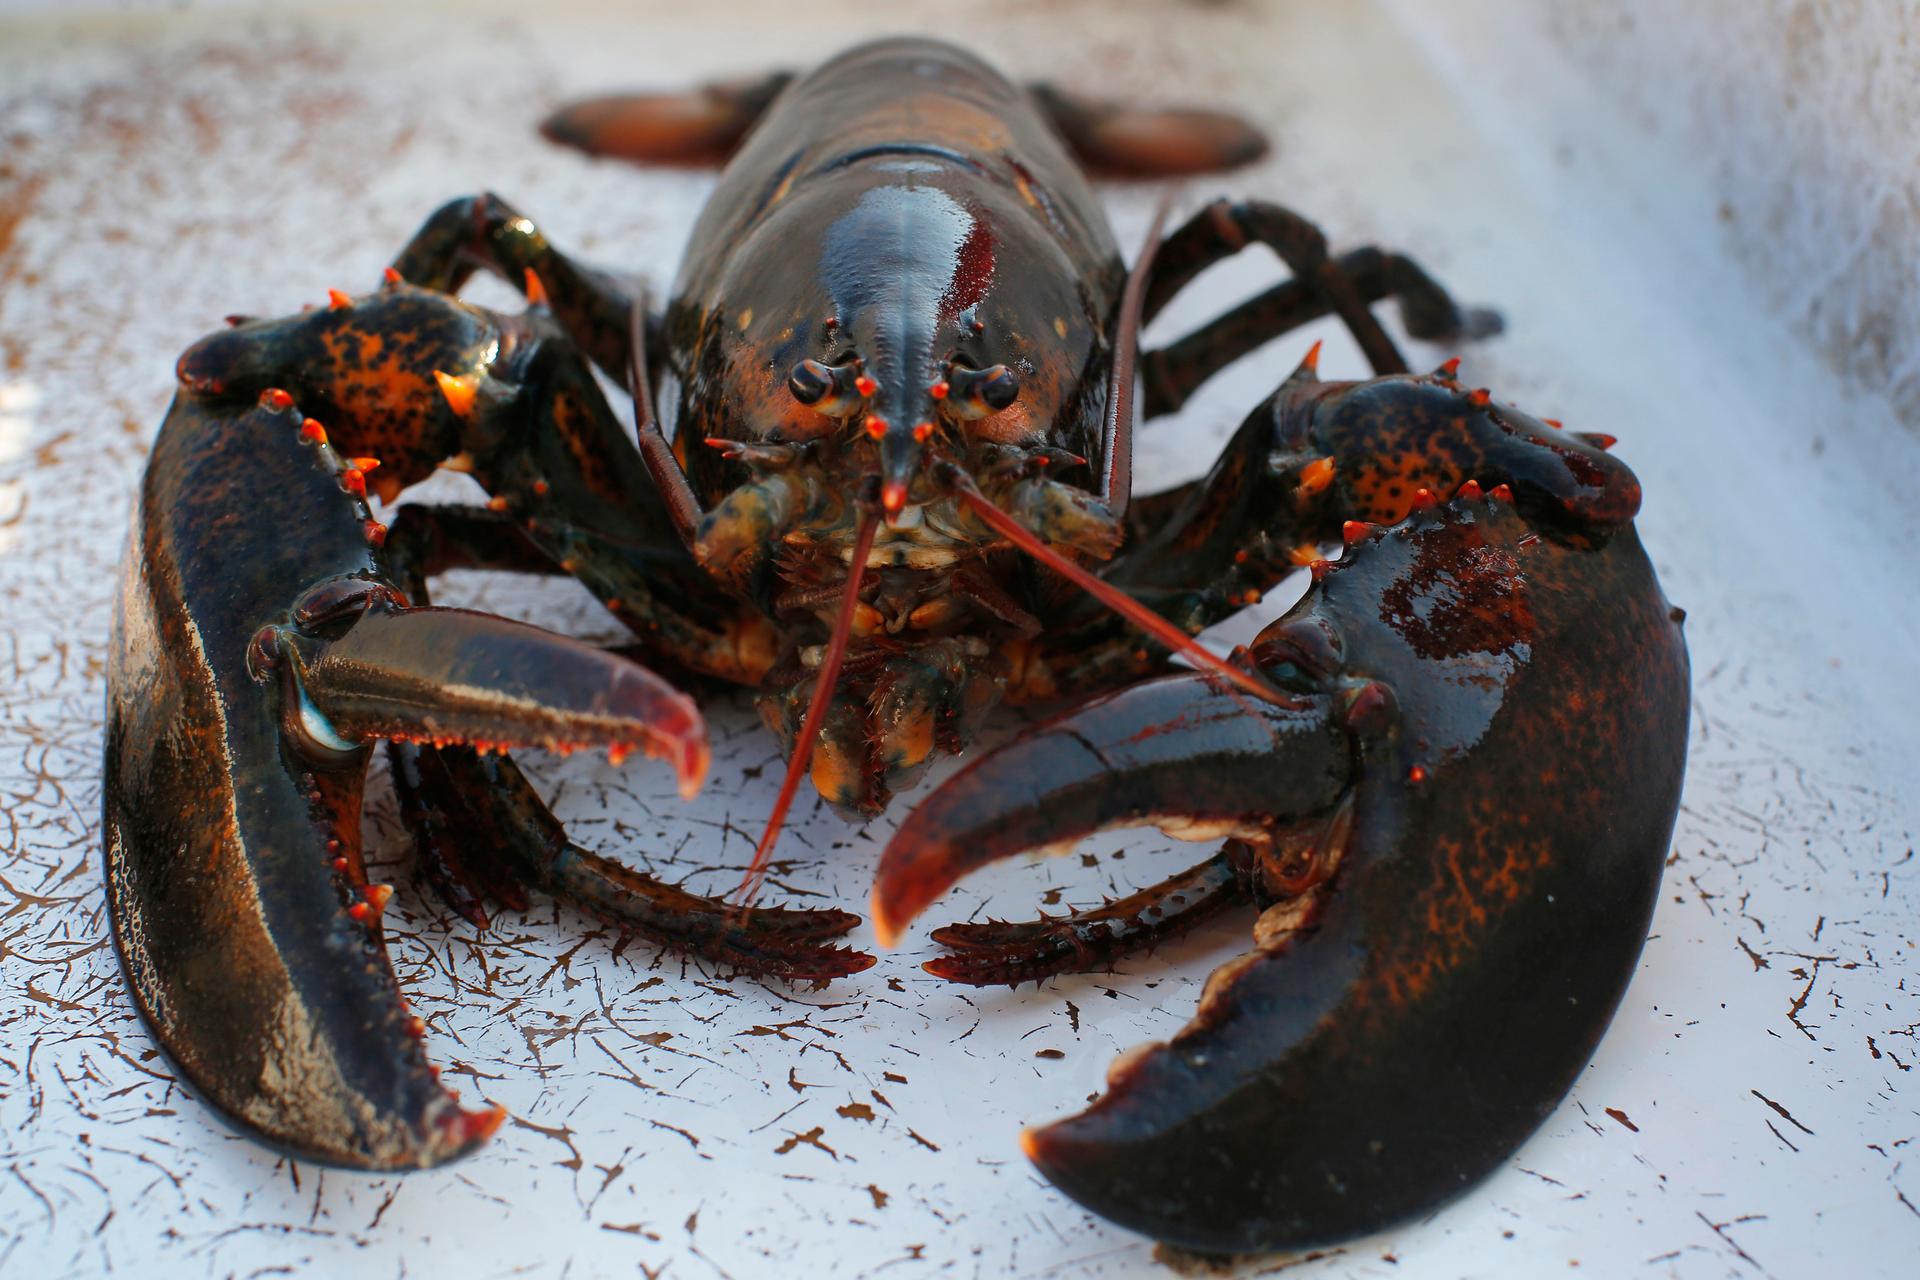 A lobster sits in a holding bin before having its claws banded onboard the lobster boat "Wild Irish Rose" in the waters off Cape Elizabeth, Maine August 21, 2013.